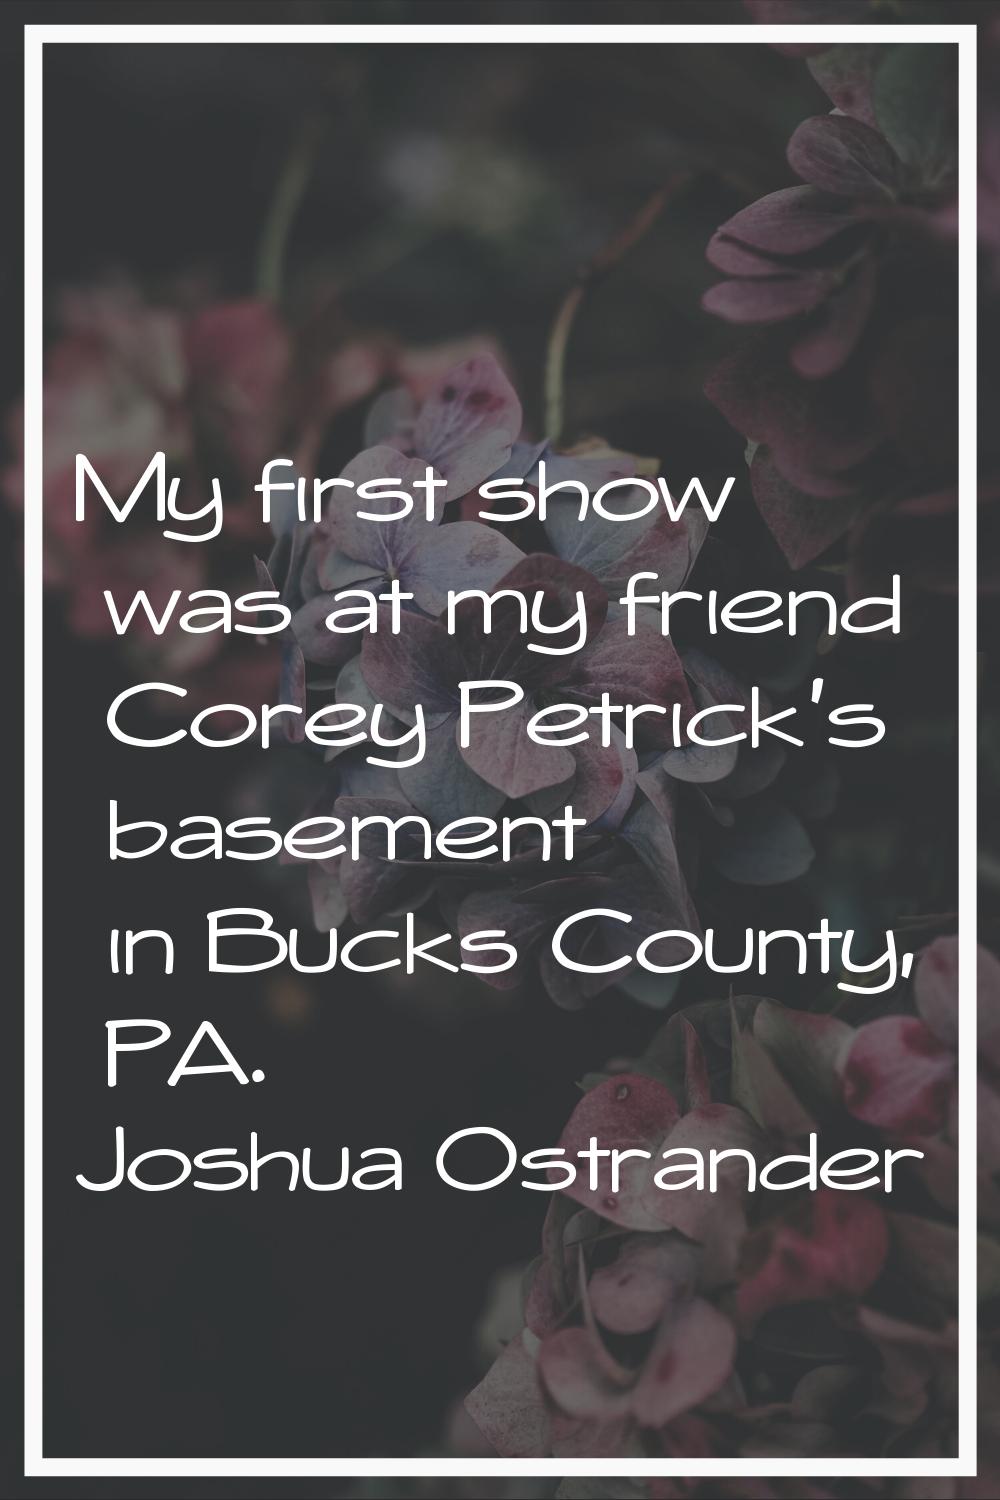 My first show was at my friend Corey Petrick's basement in Bucks County, PA.